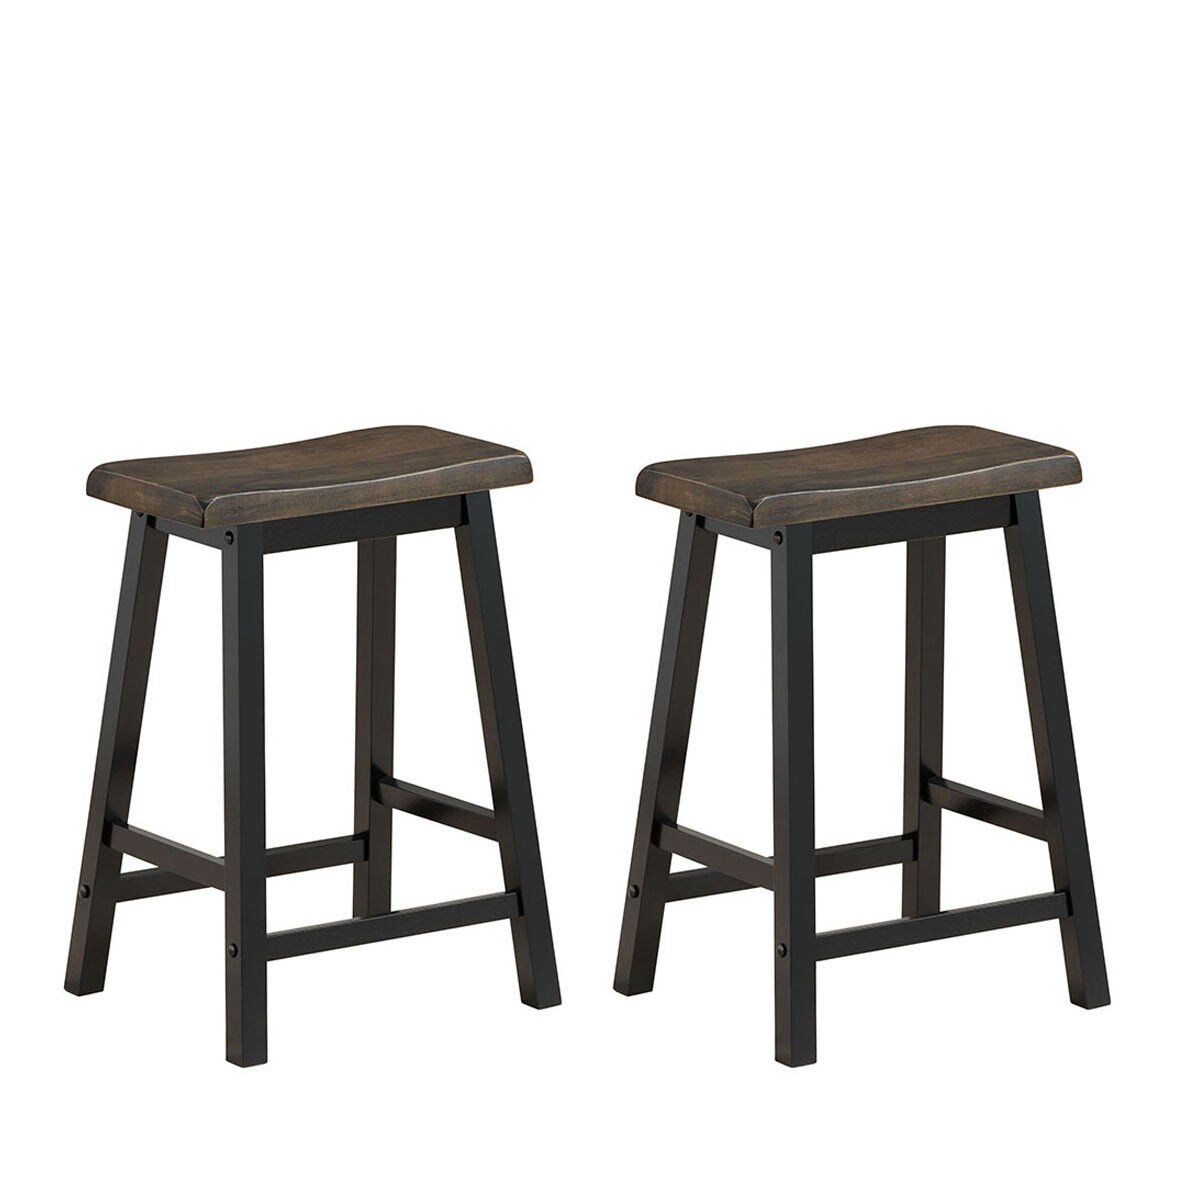 Gymax Set of 2 Bar Stools 24H Saddle Seat Pub Chair Home Kitchen Dining Room Gray